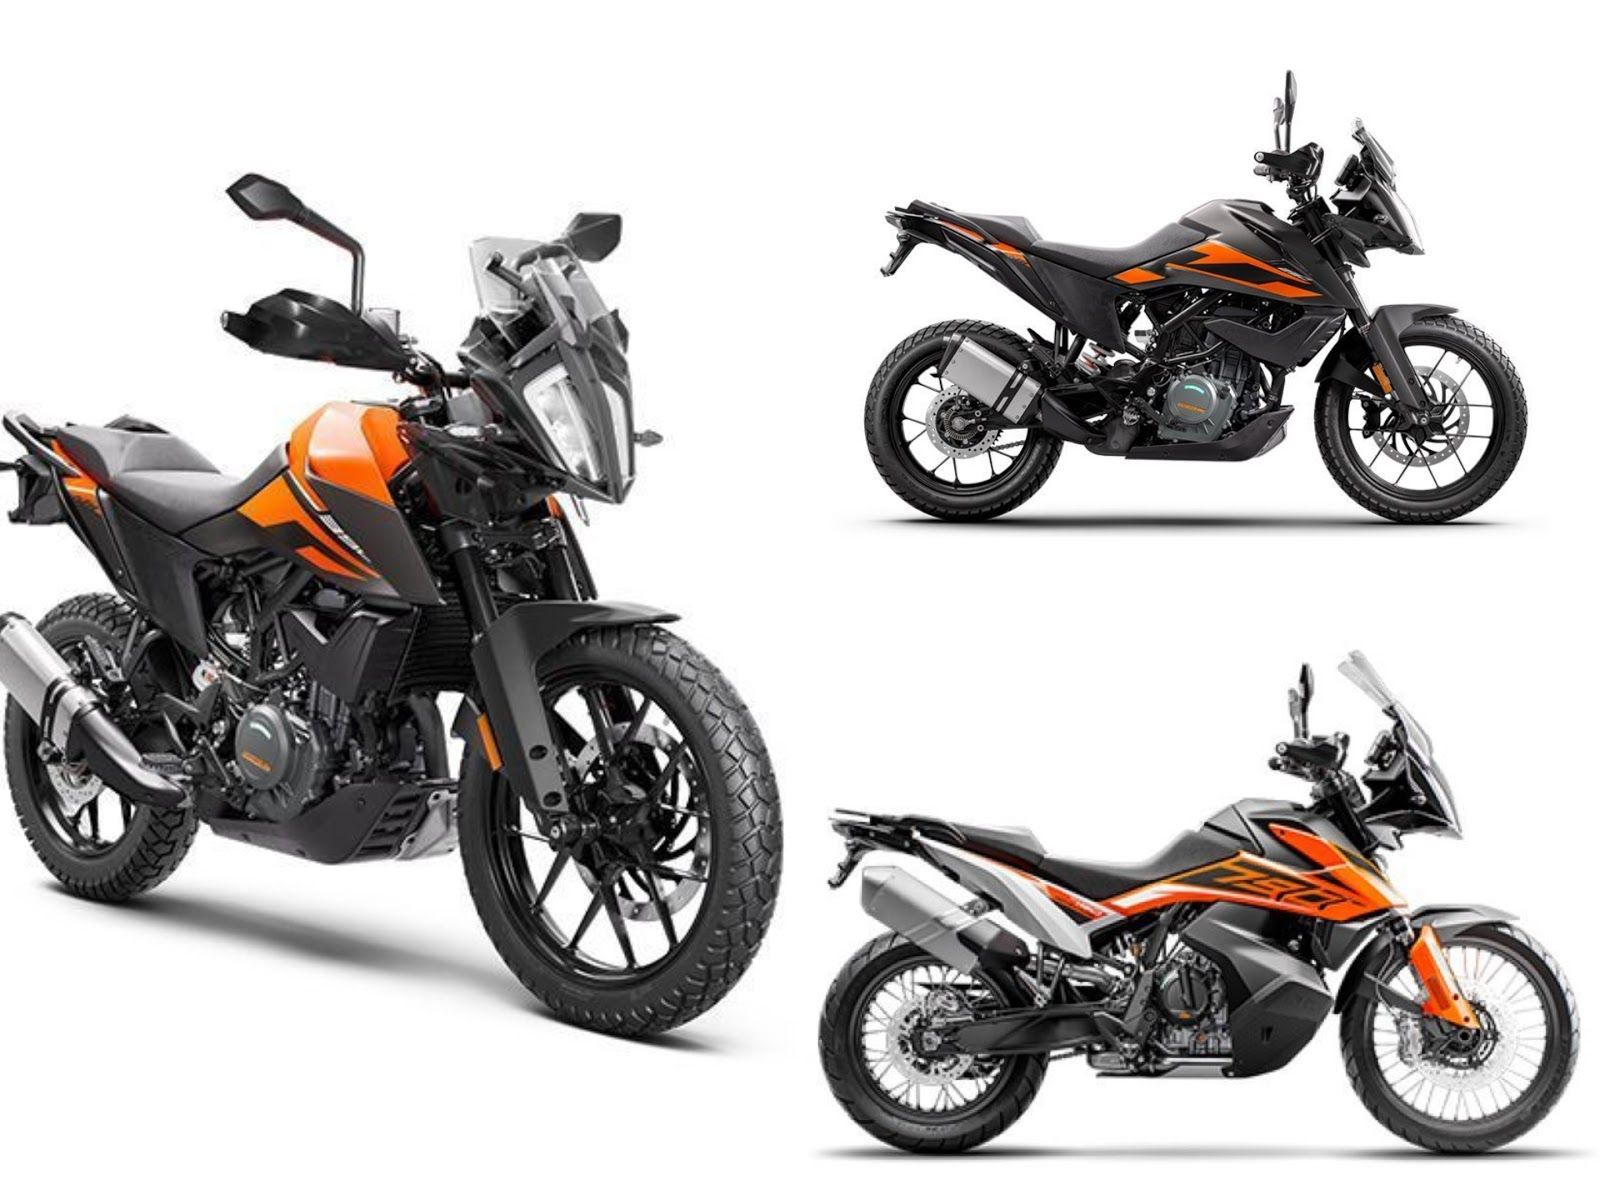 What To Expect From KTM In 2020: 390 Adventure, 250 Adventure, BS6